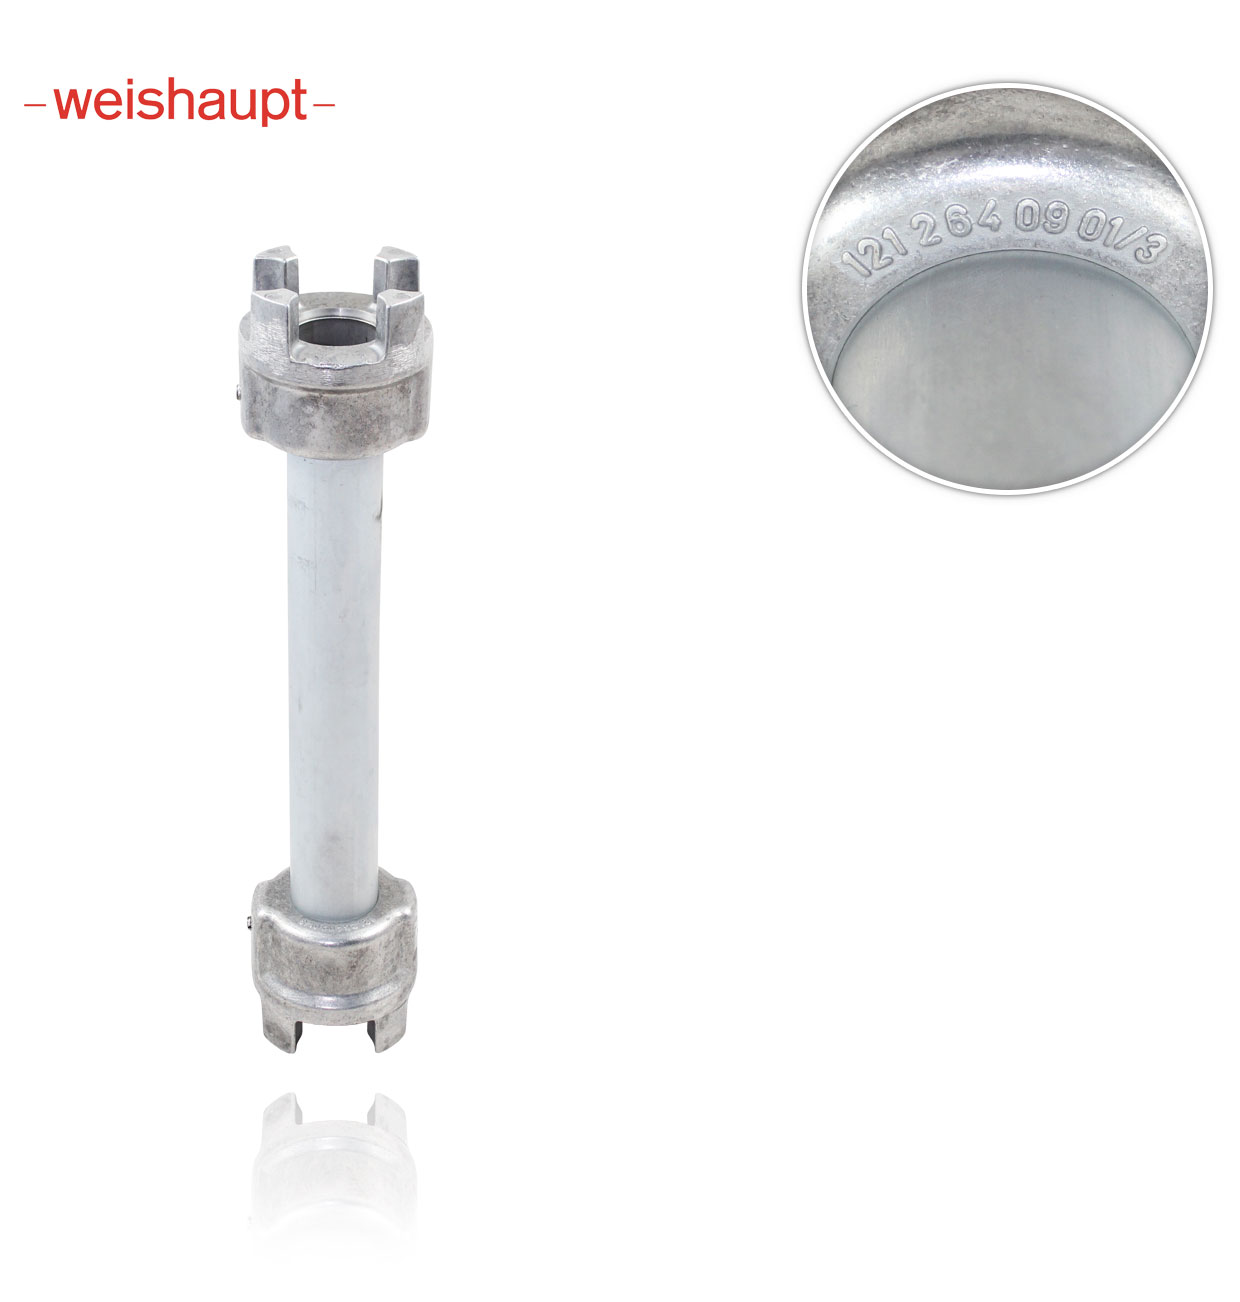 WEISHAUPT 262mm CENTRAL COUPLING